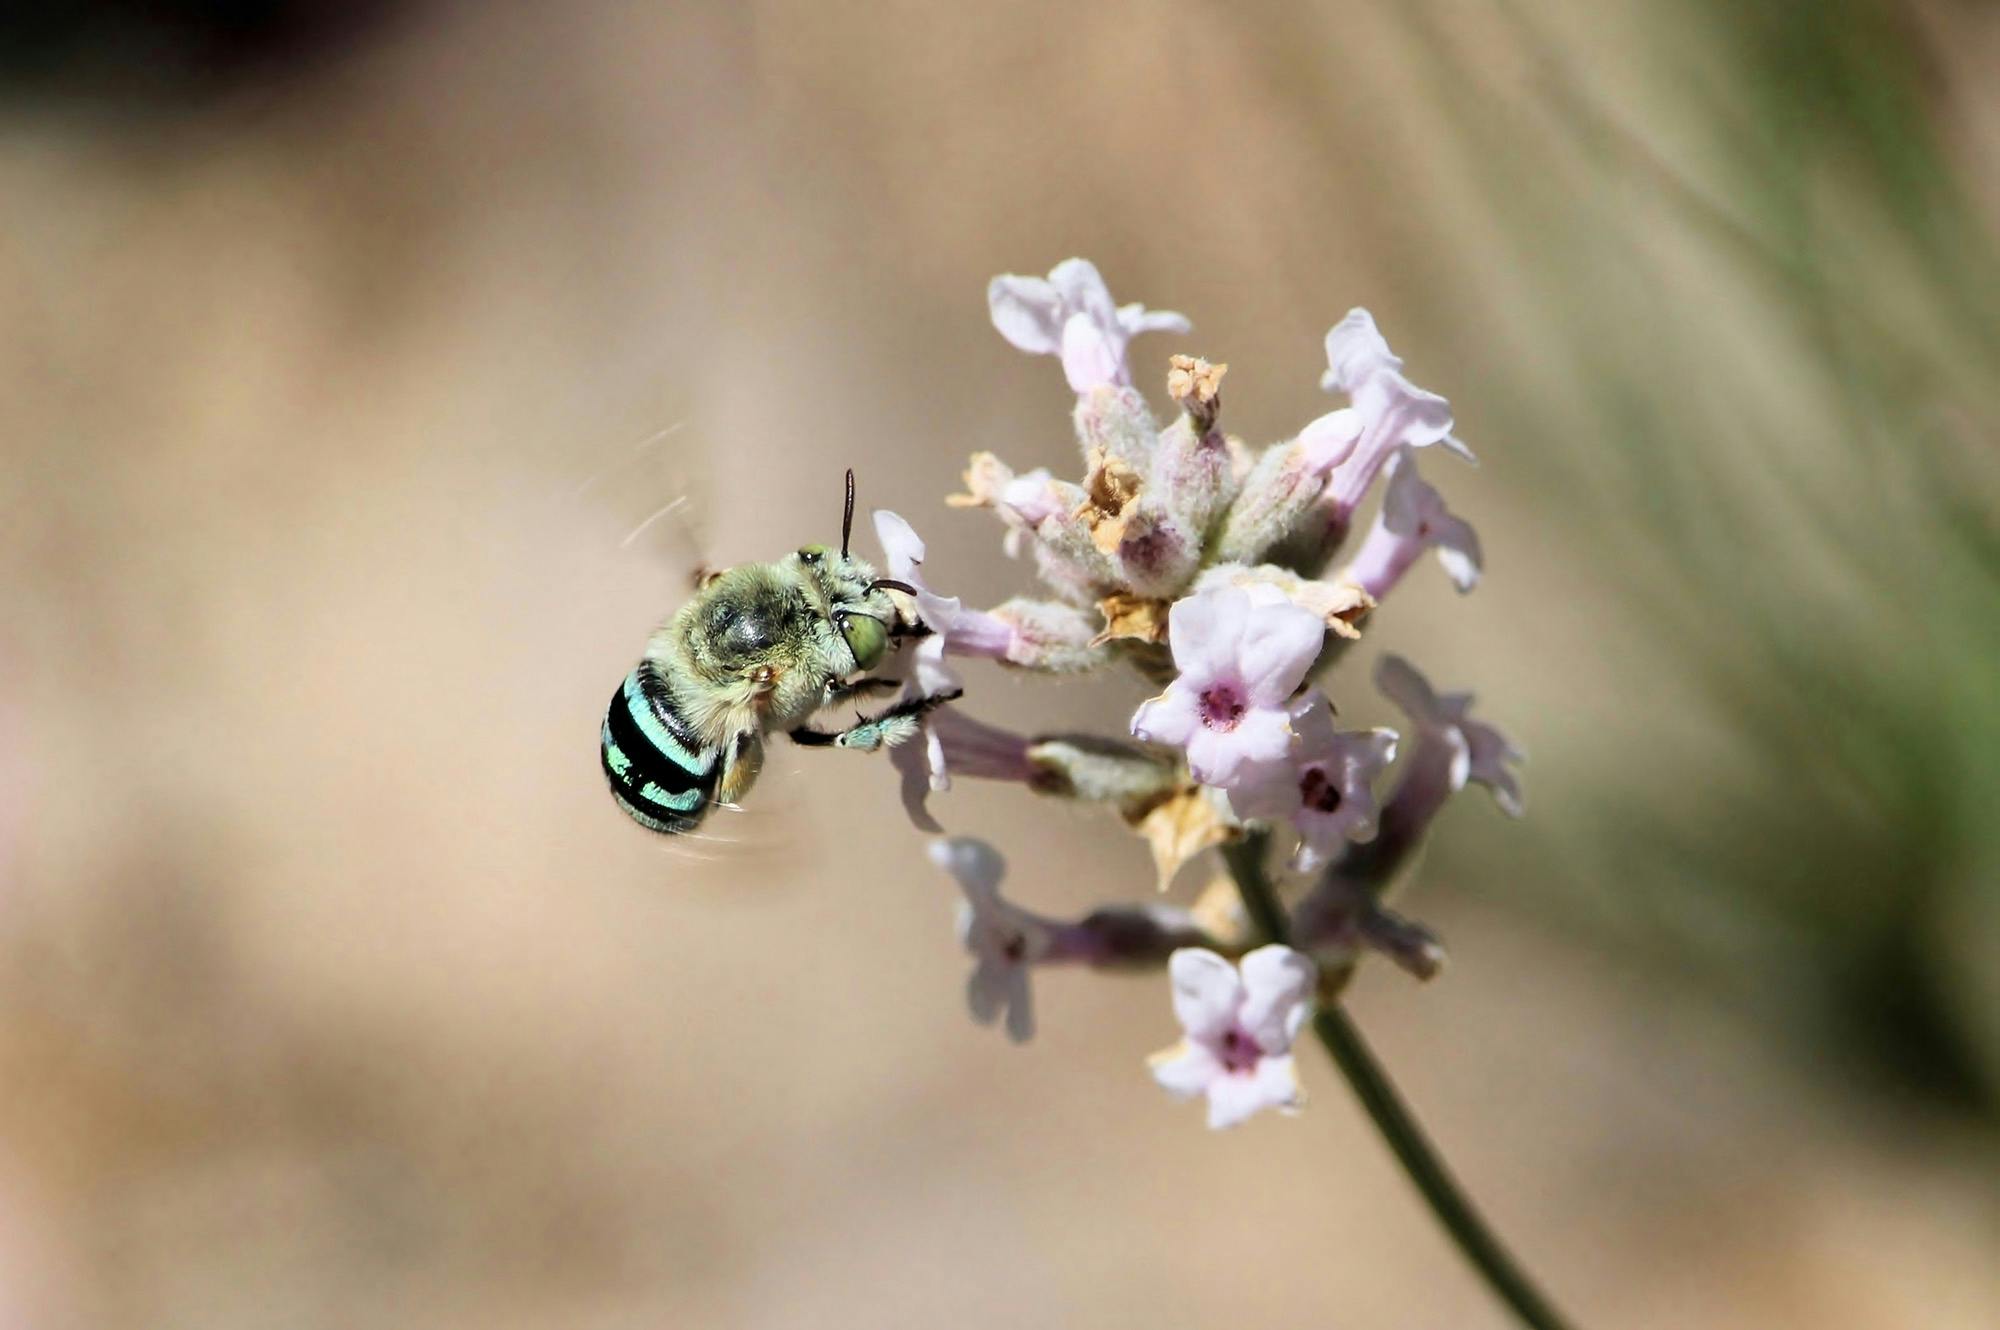 A close-up photograph of a blue banded bee on a flower. The background is out of focus. 